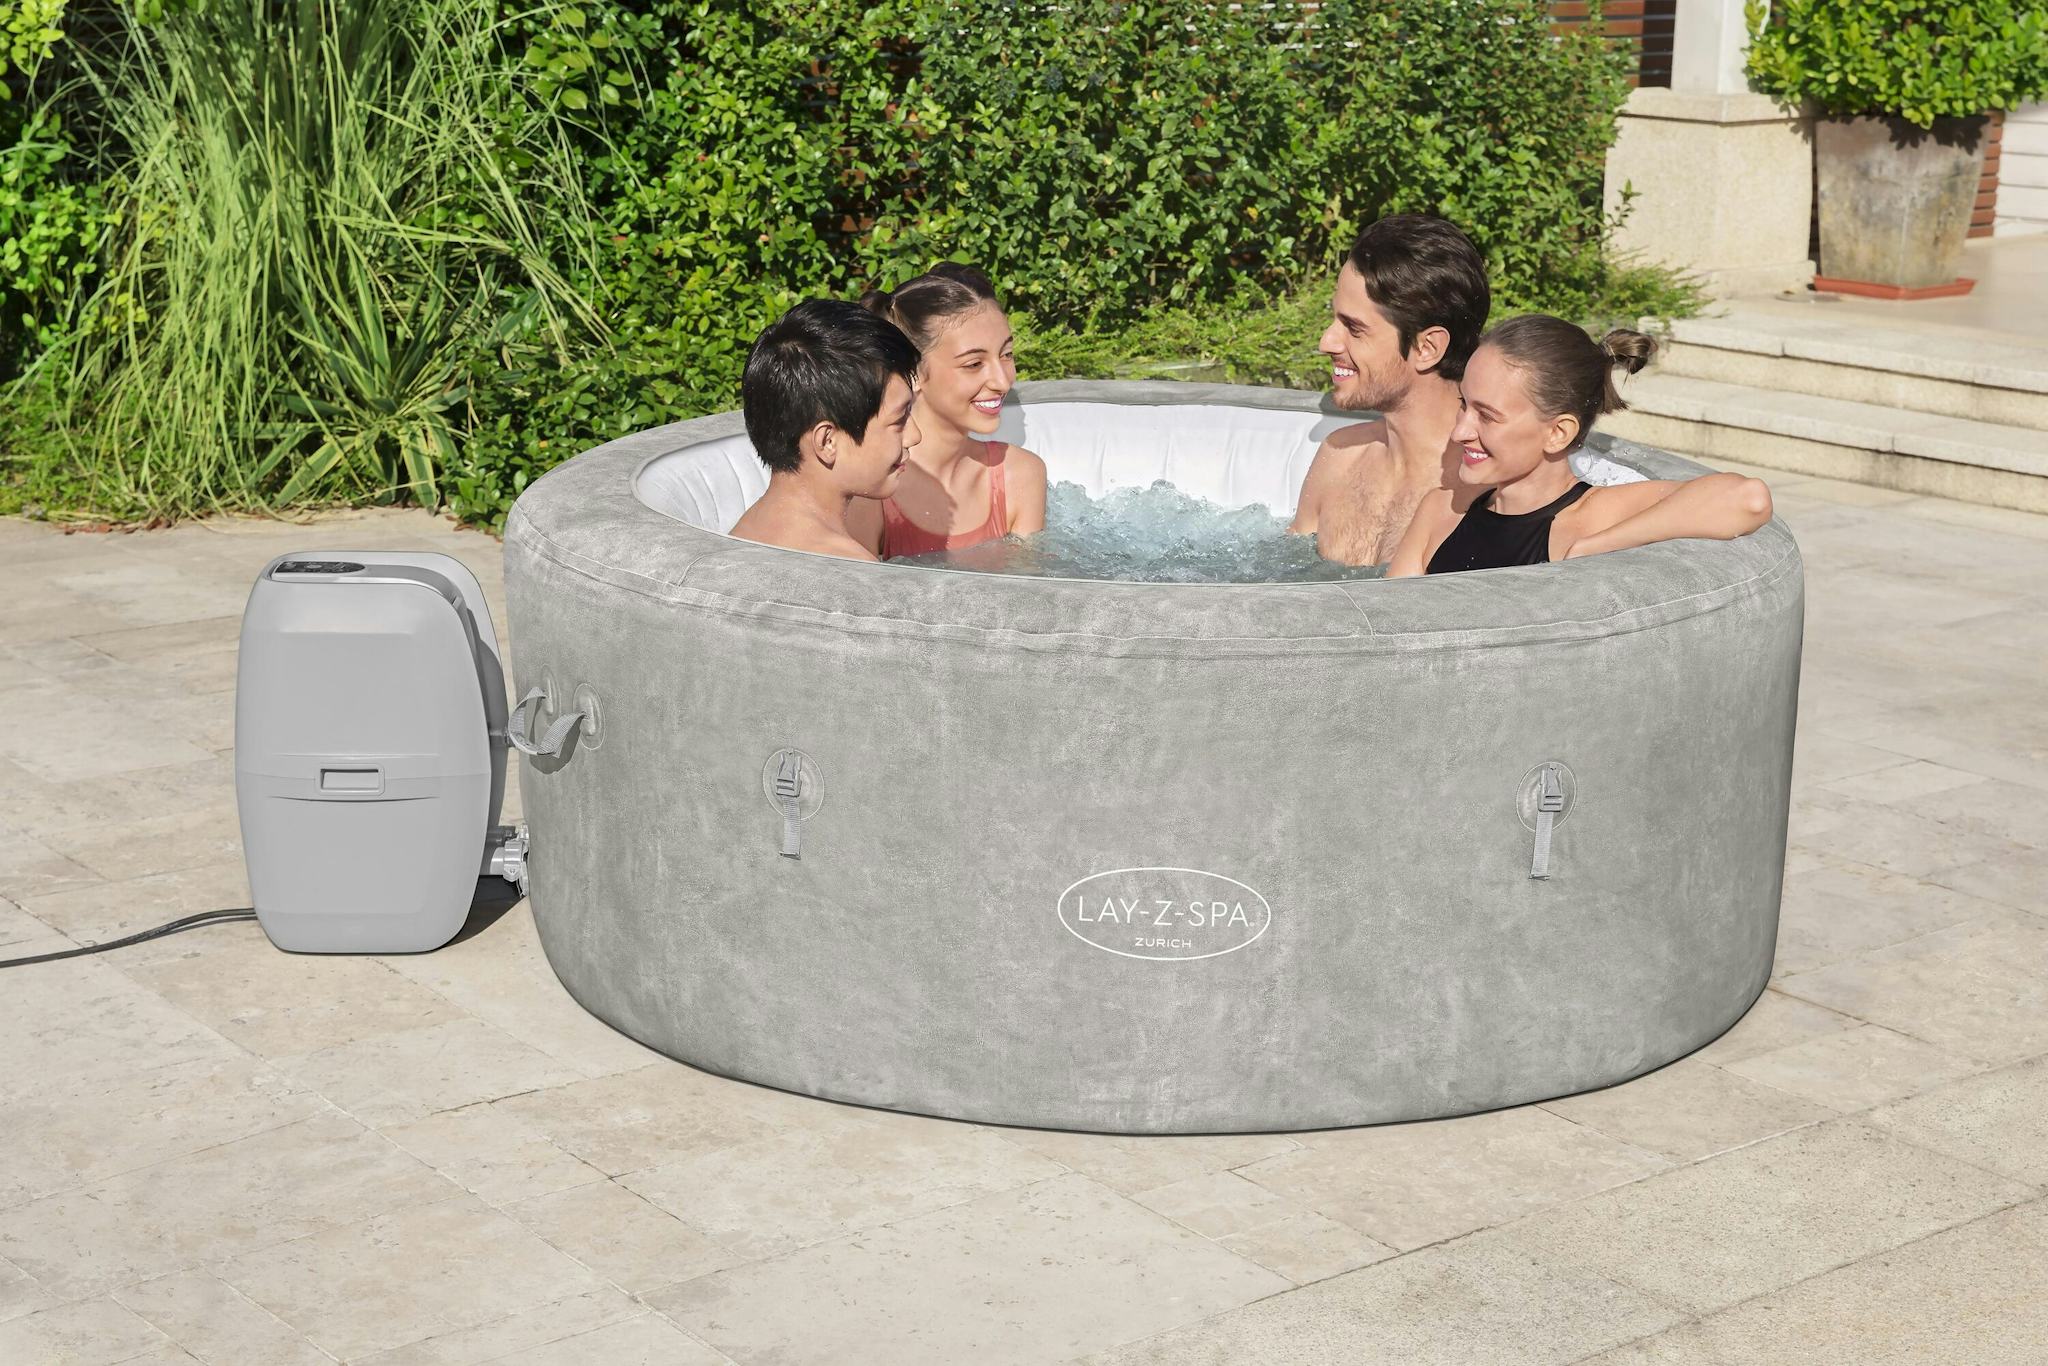 Spas Gonflables Spa gonflable rond Lay-Z-Spa Zurich Airjet™ 2 - 4 personnes Bestway 8